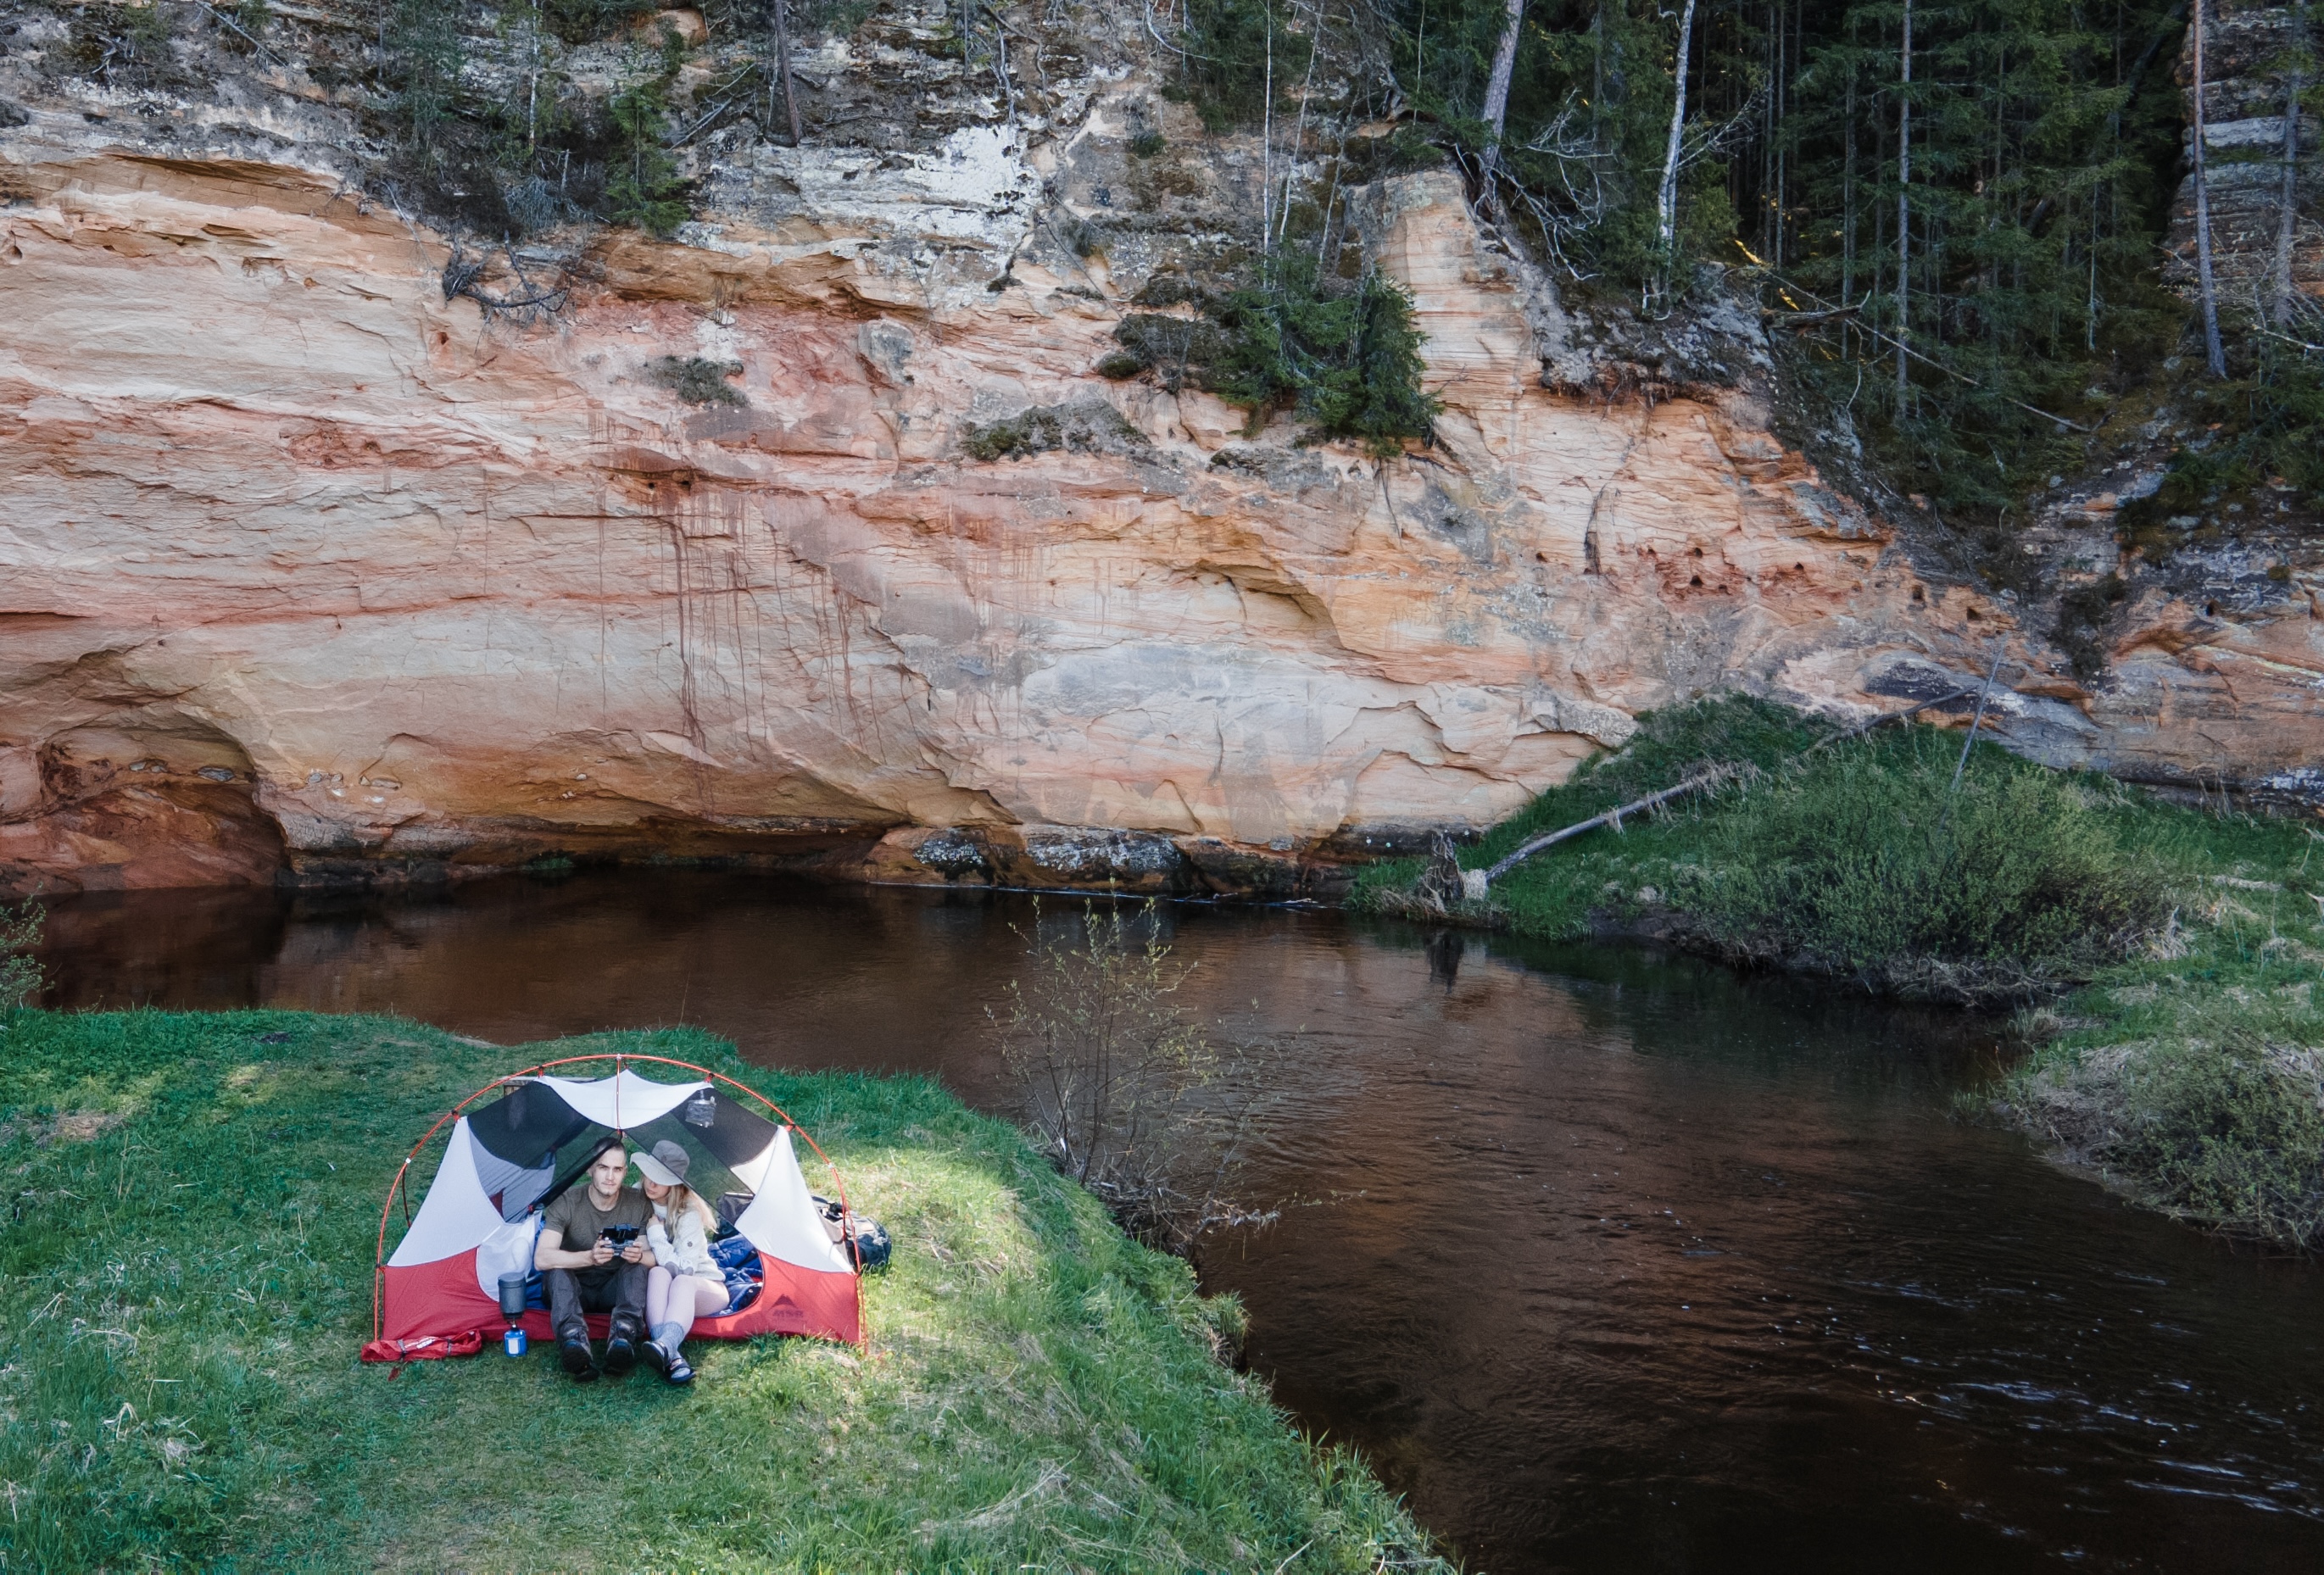 Camping by the Taevaskoda sandstone outcrops